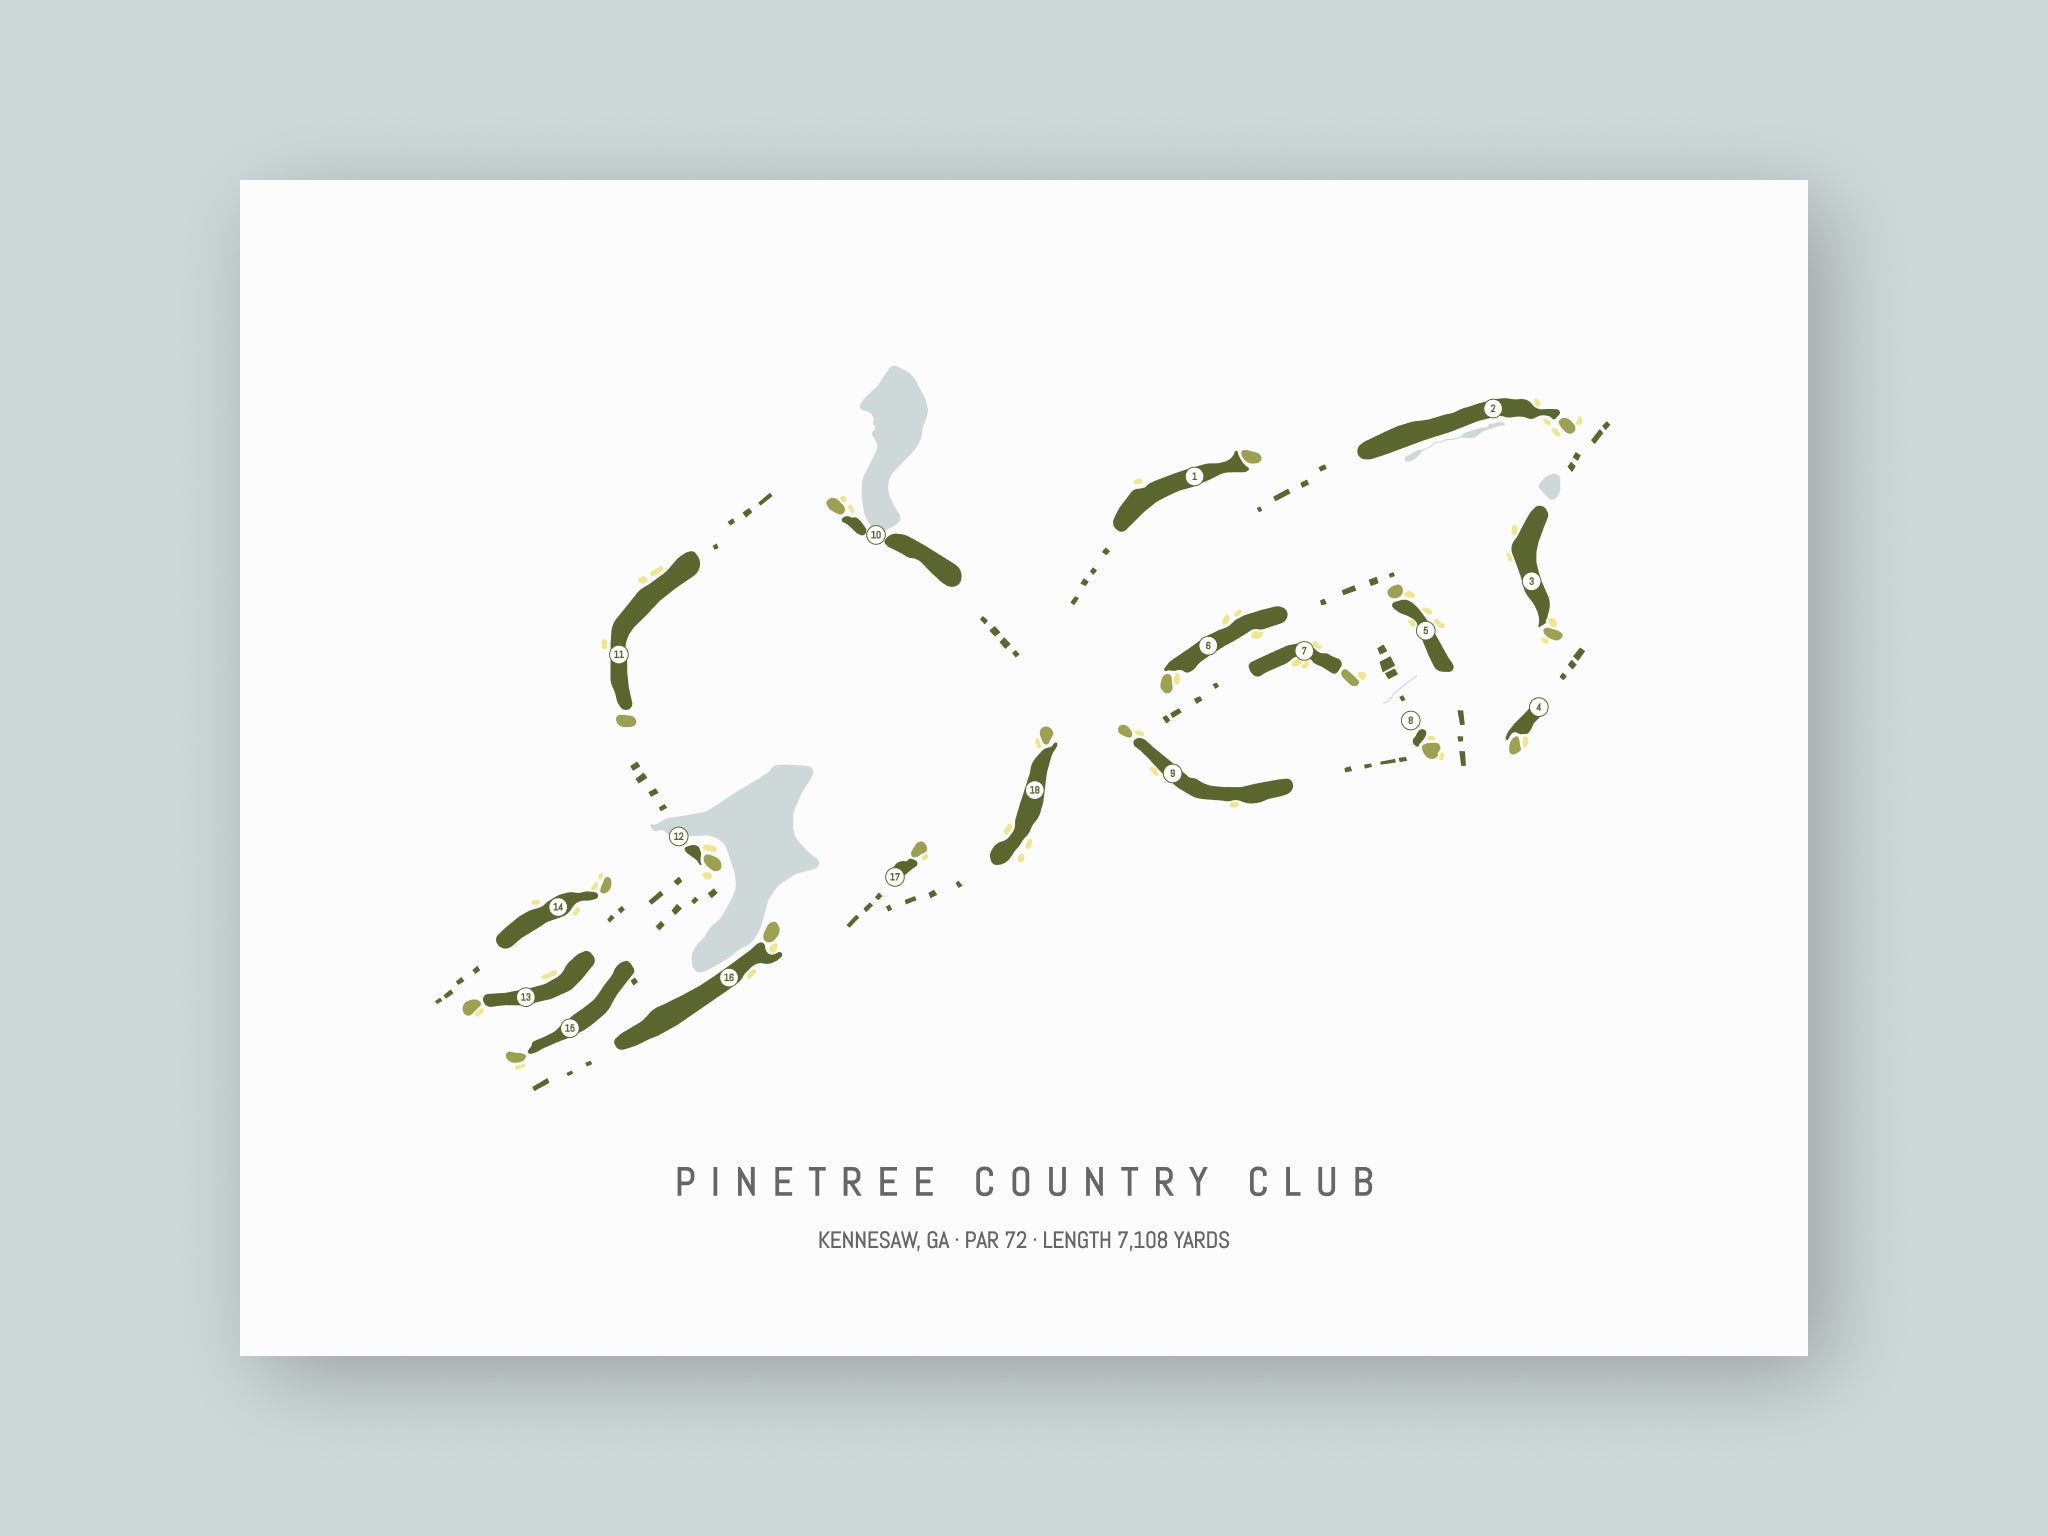 Pinetree-Country-Club-GA--Unframed-24x18-With-Hole-Numbers